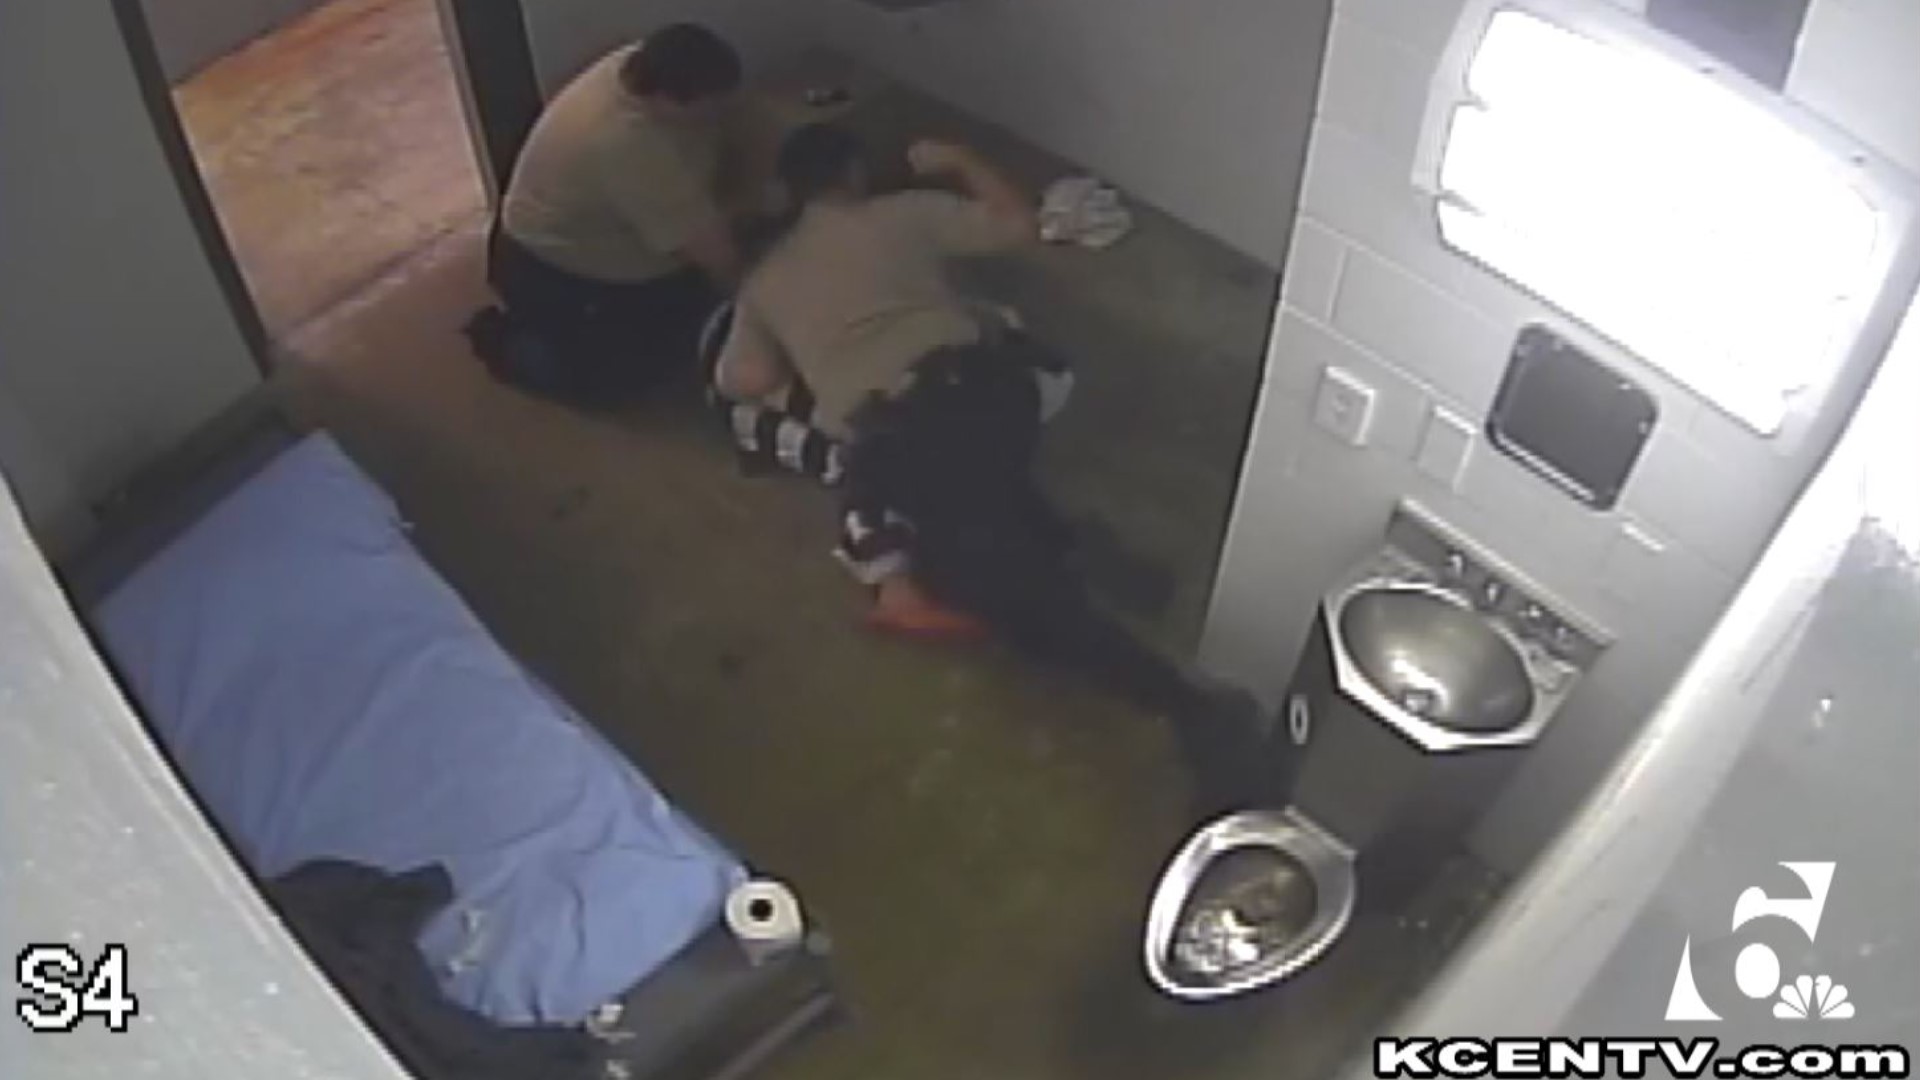 KCEN Channel 6 obtained footage of the confrontation that led to Kelli Page’s death after her family sued the Coryell County Jail. Reporter Cole Johnson spoke to the Page family's attorney about the video.